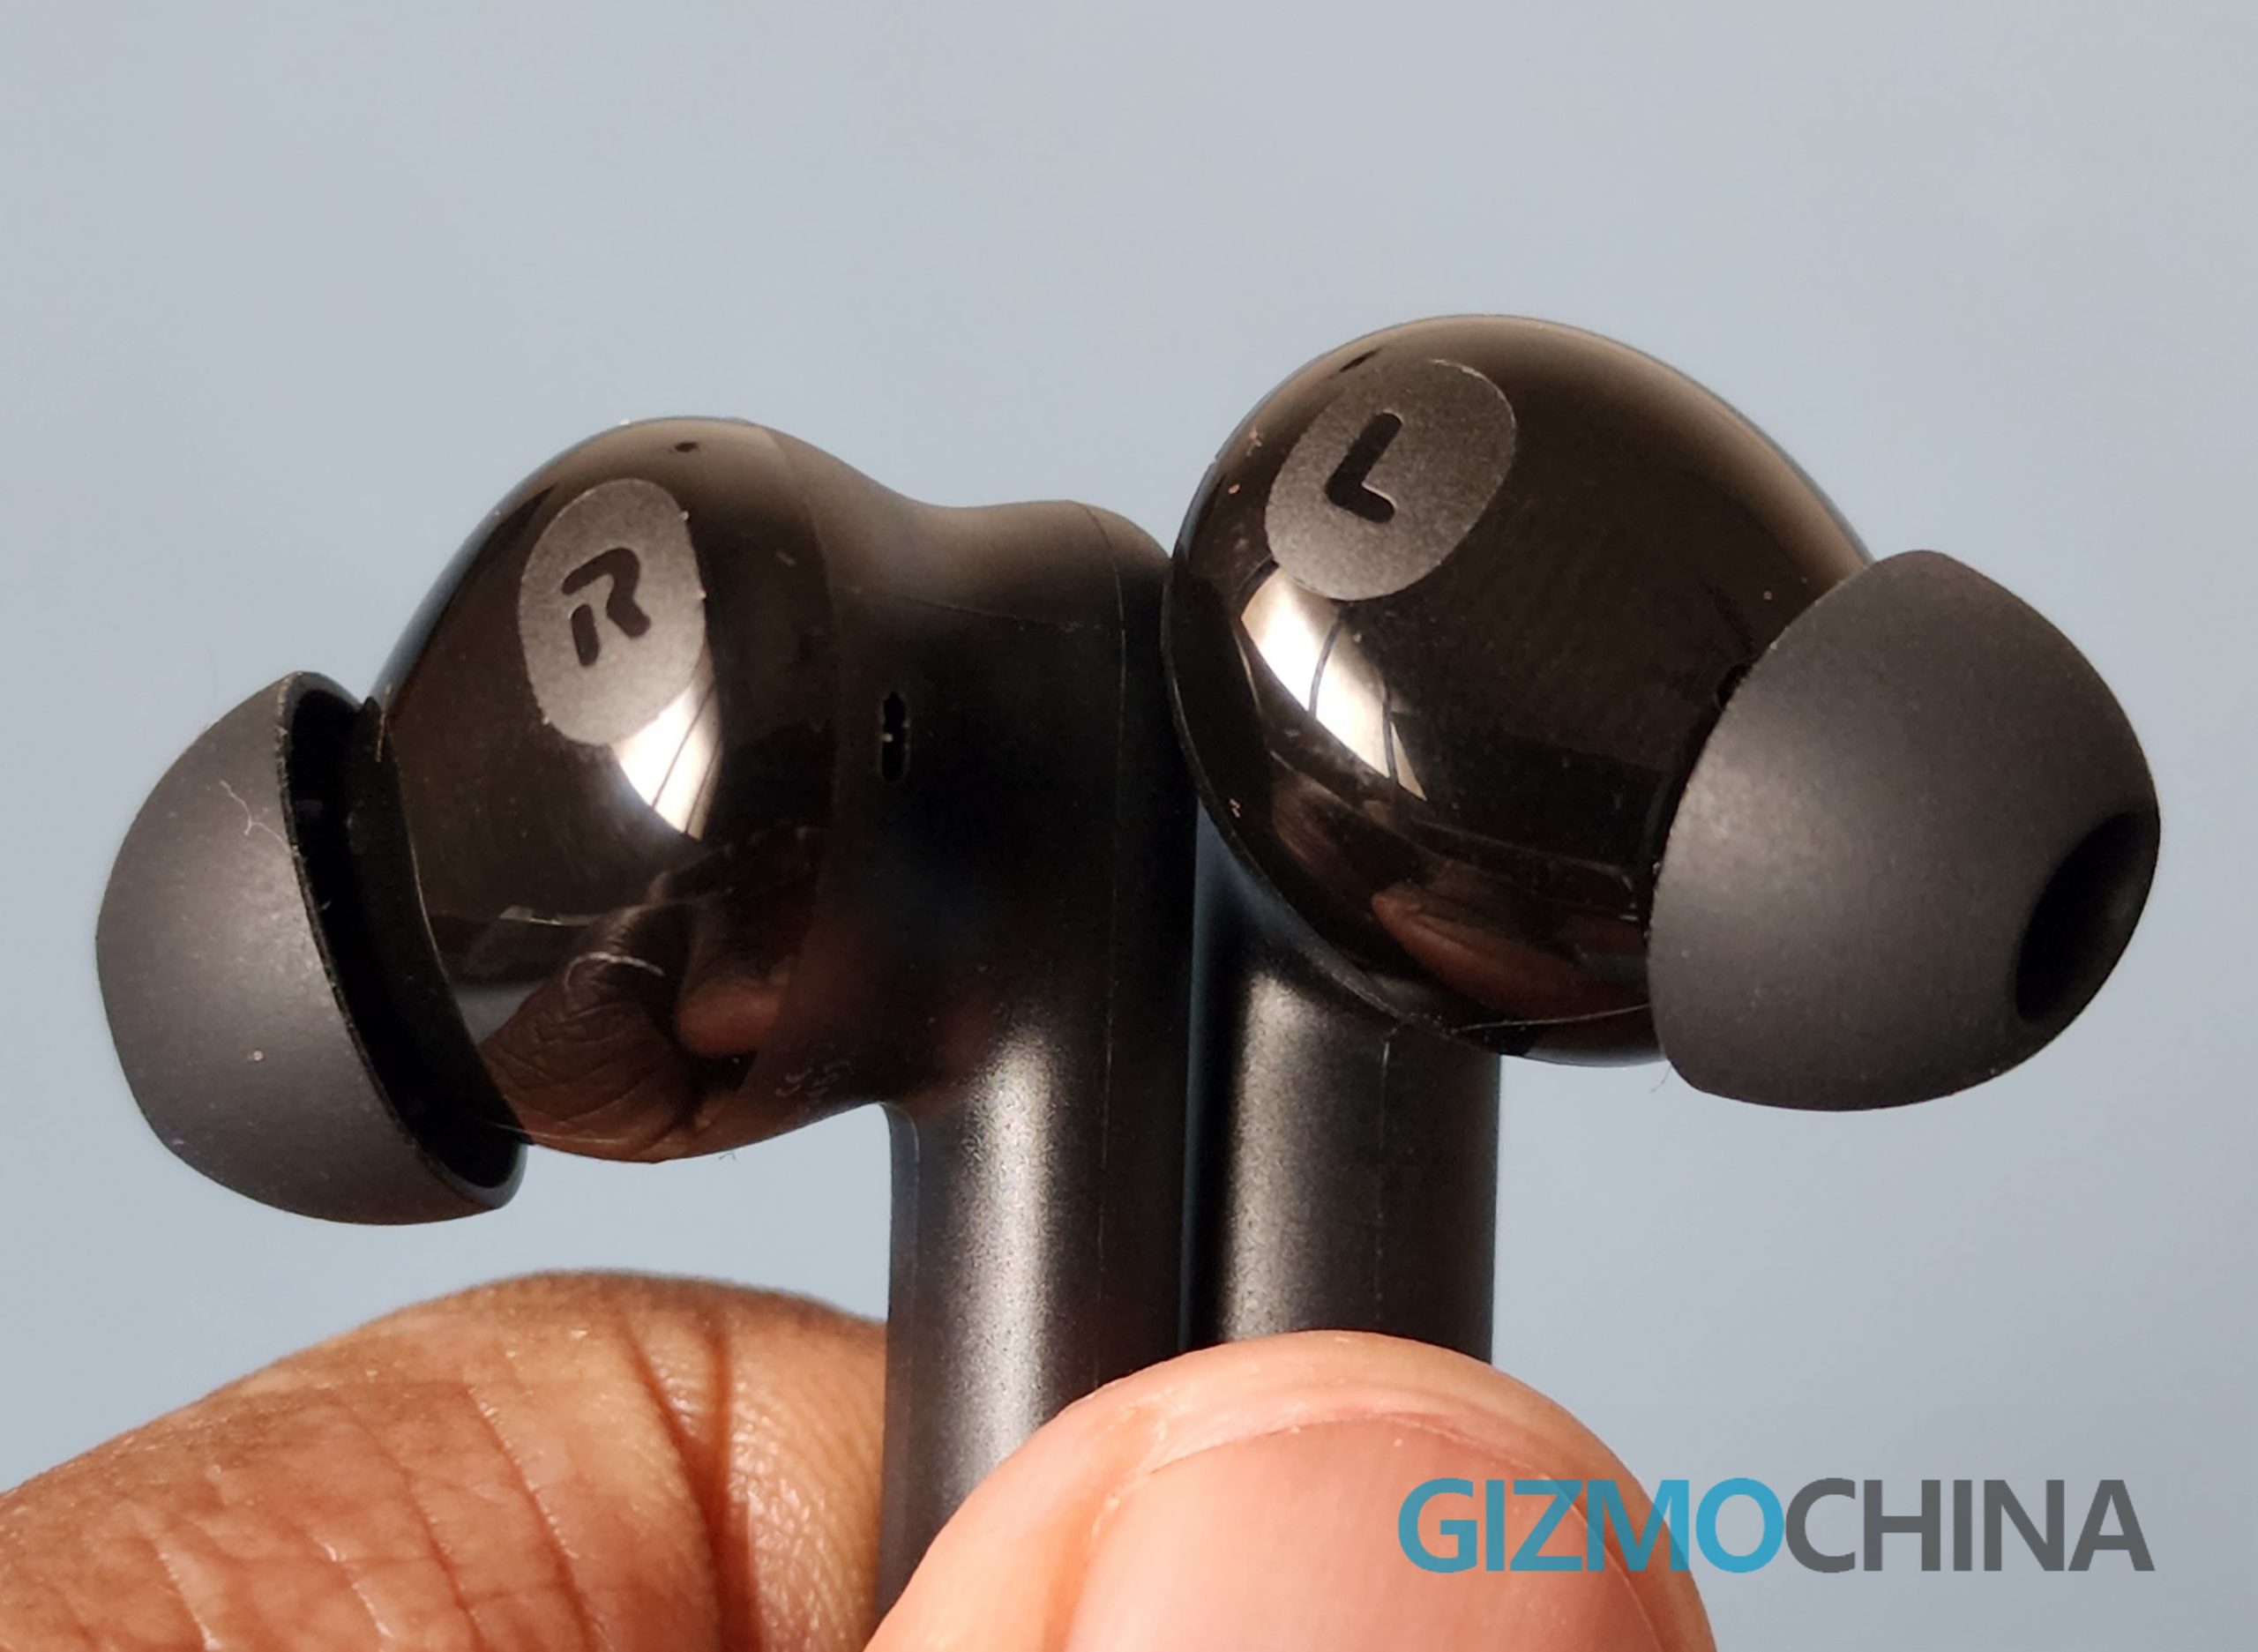 Oppo Enco Buds 2 TWS earbuds launched in India: Details on price and specs